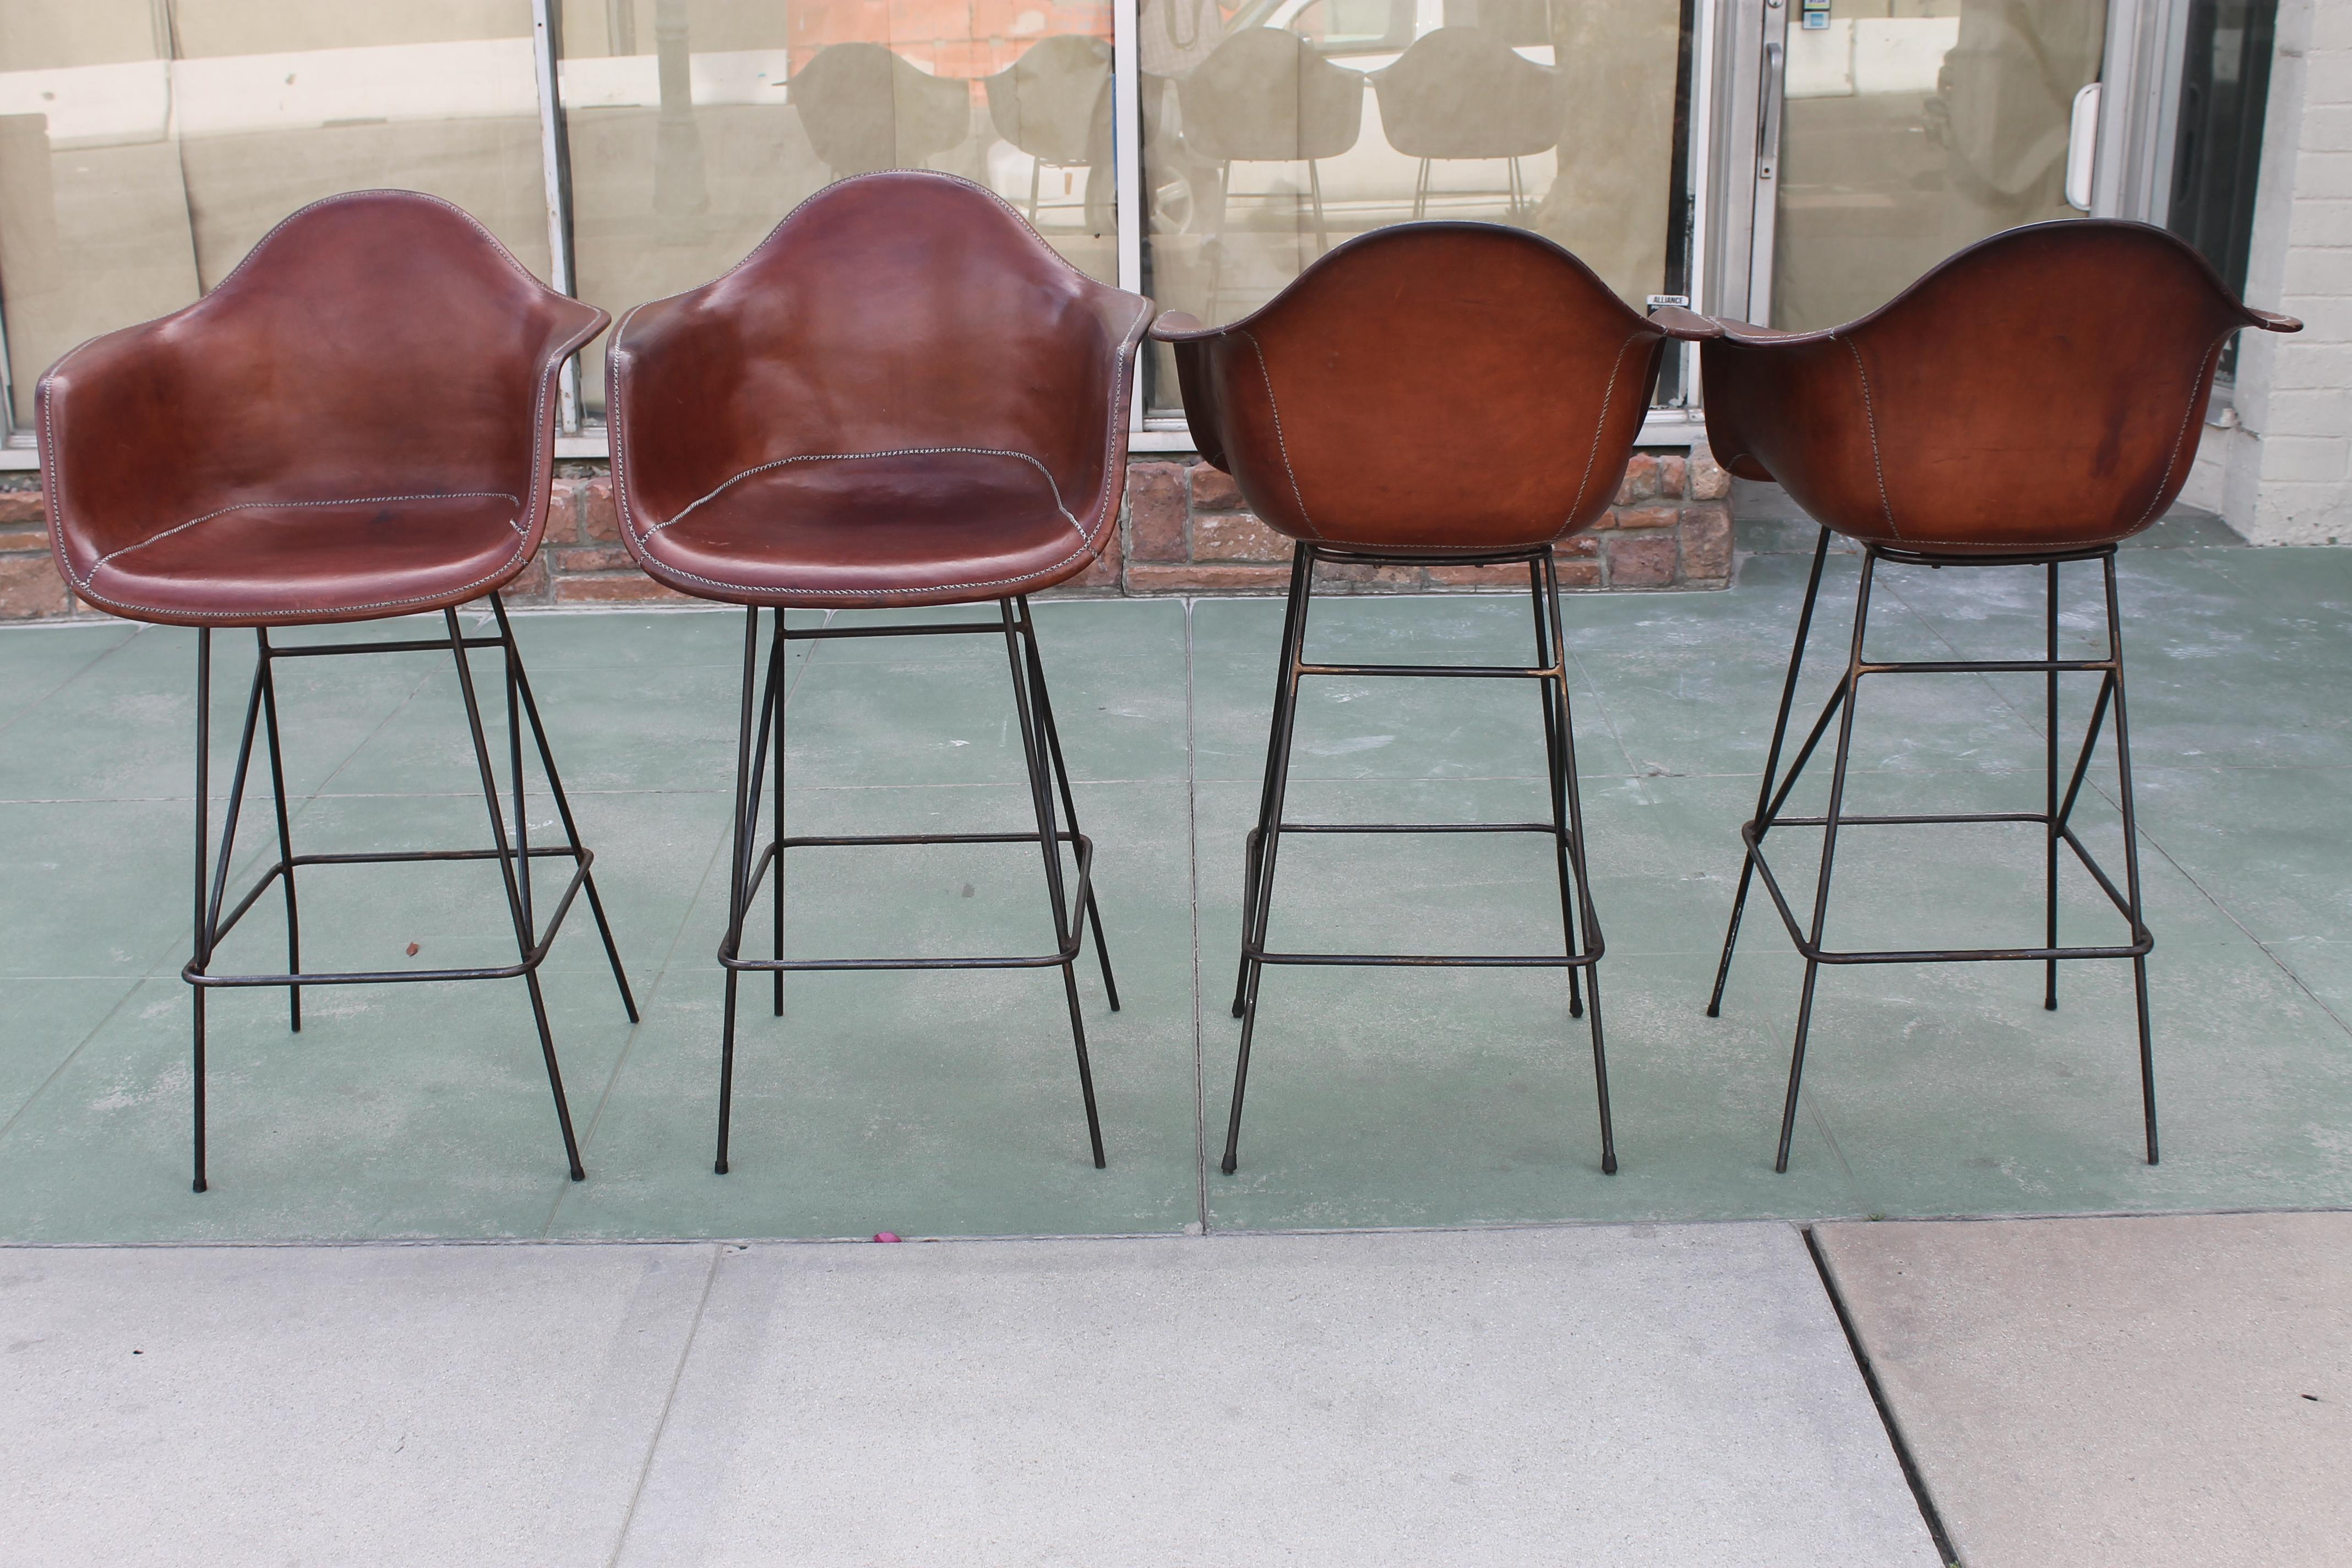 Spanish Four Leather Barstools by Sol &Luna for Los Angeles Restaurant